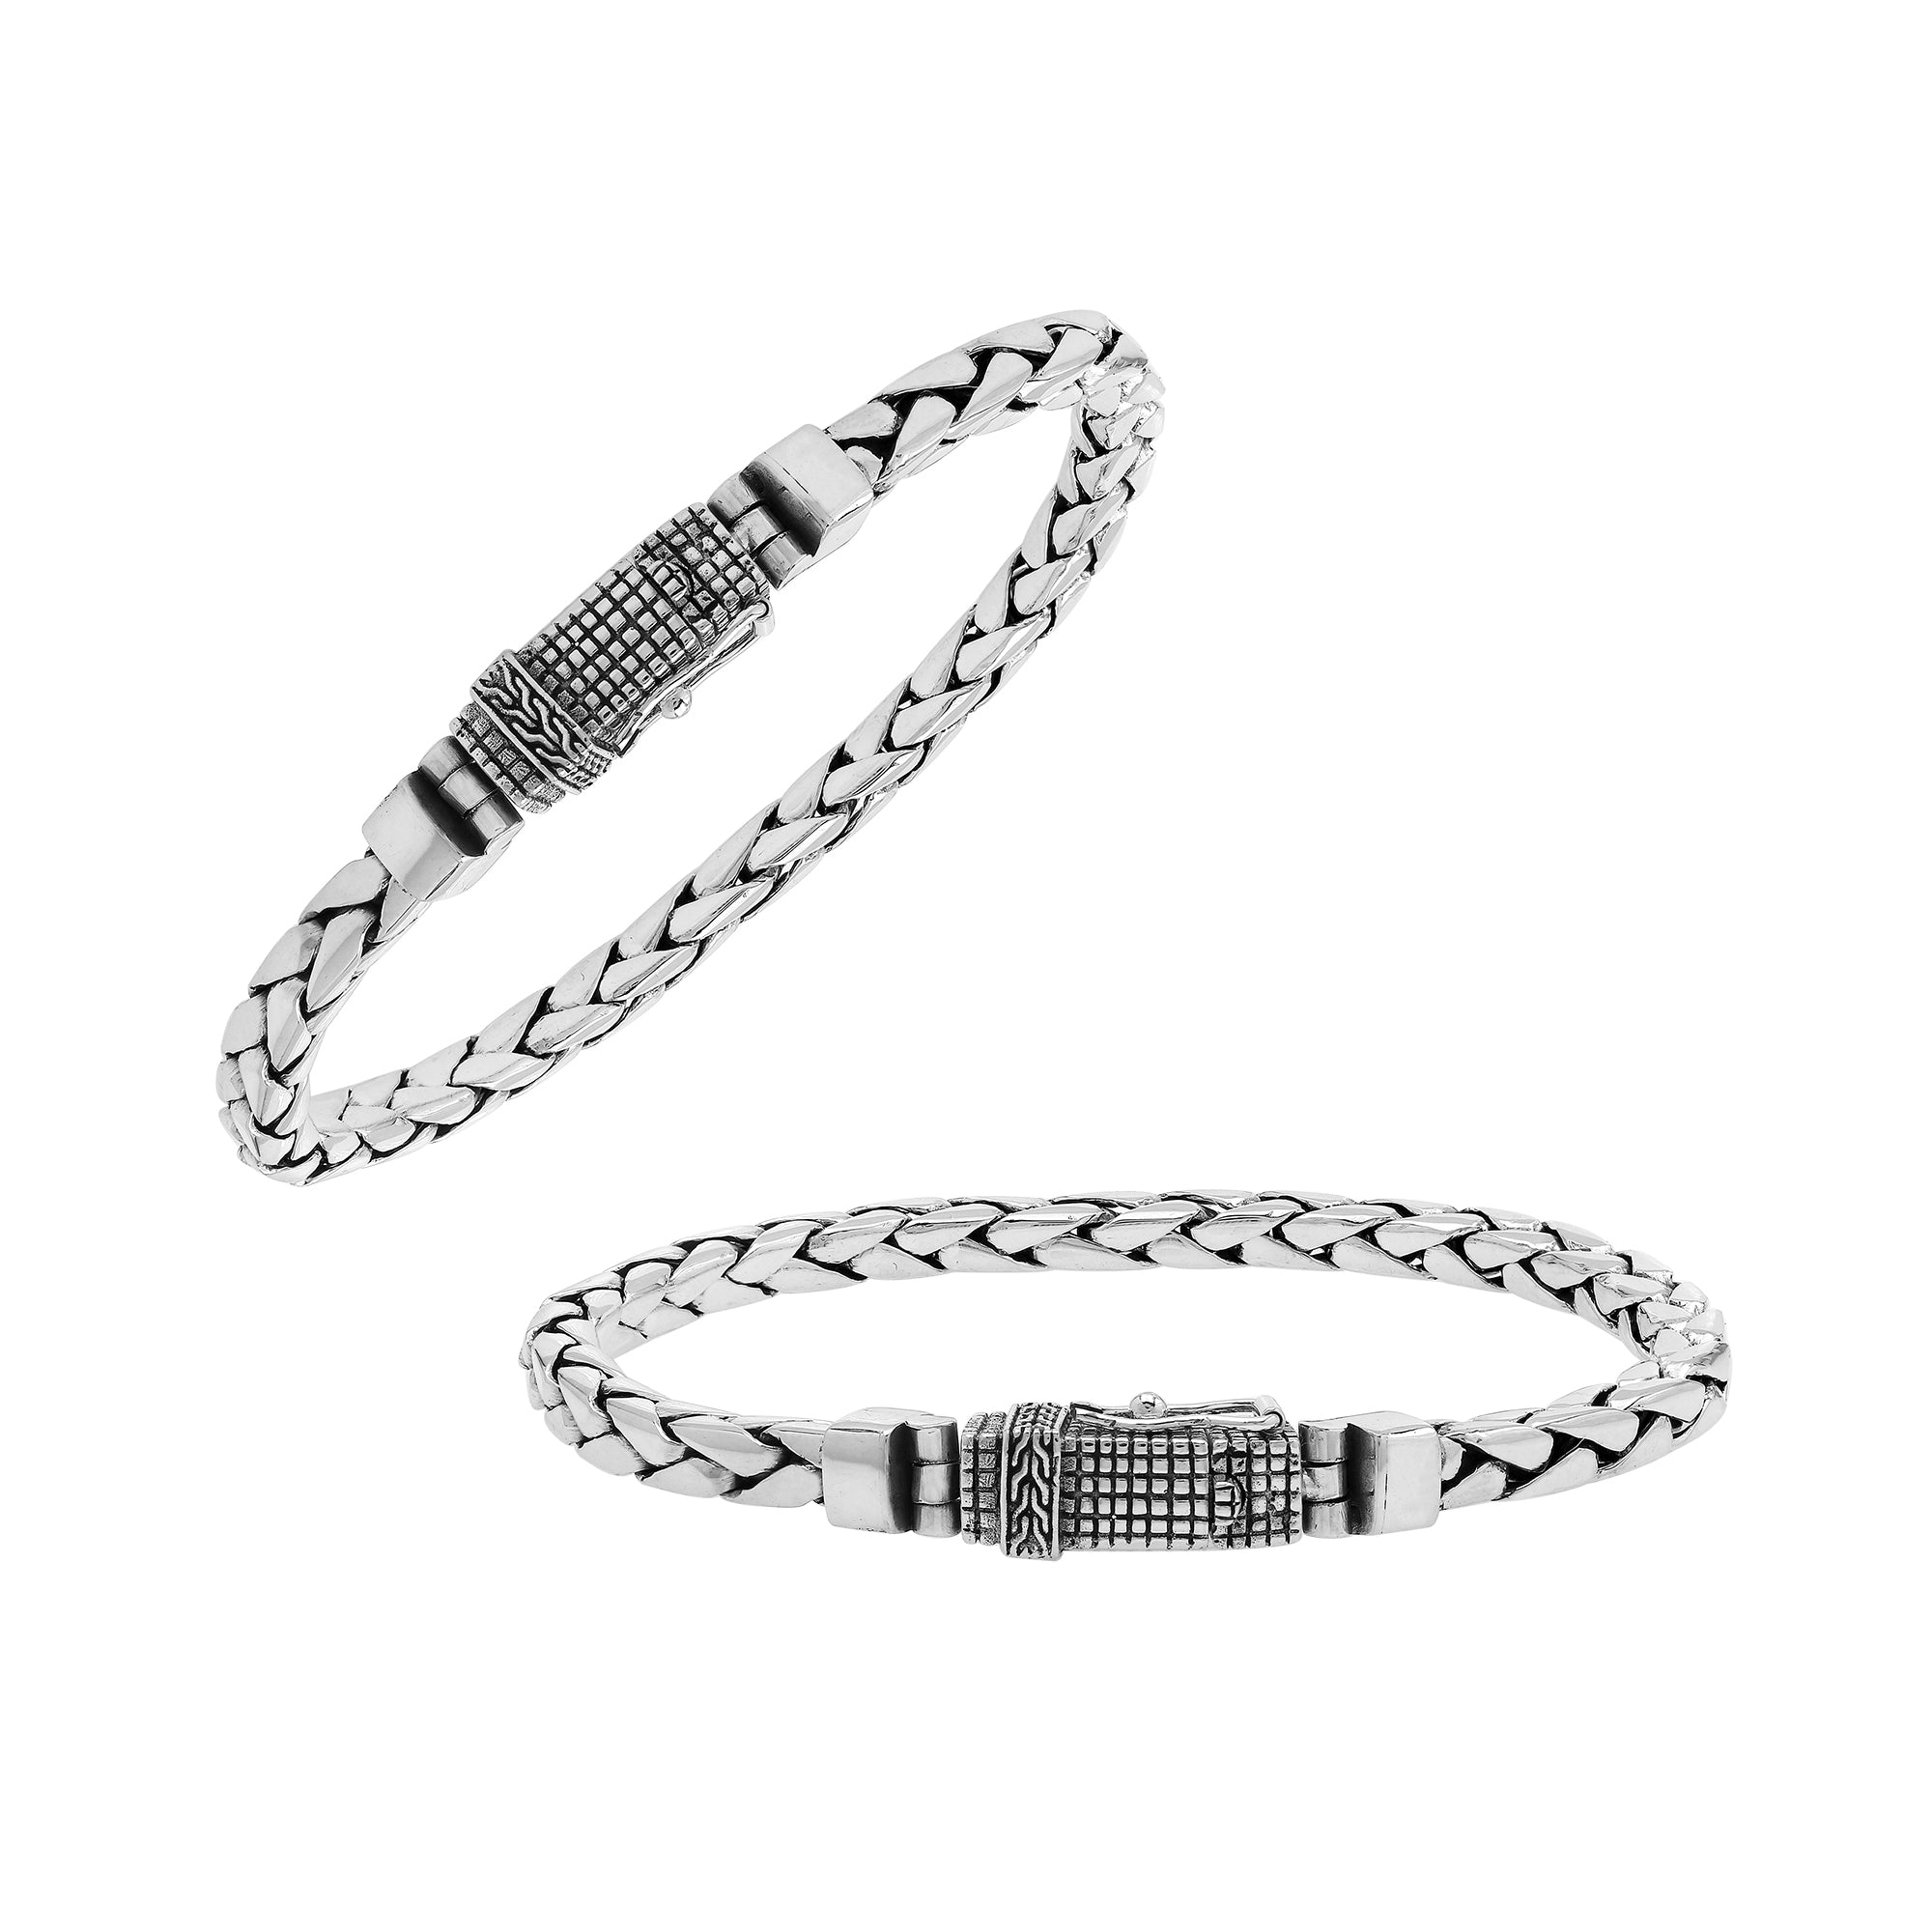 AB-1186-S-9 Sterling Silver Bracelet With Plain Silver